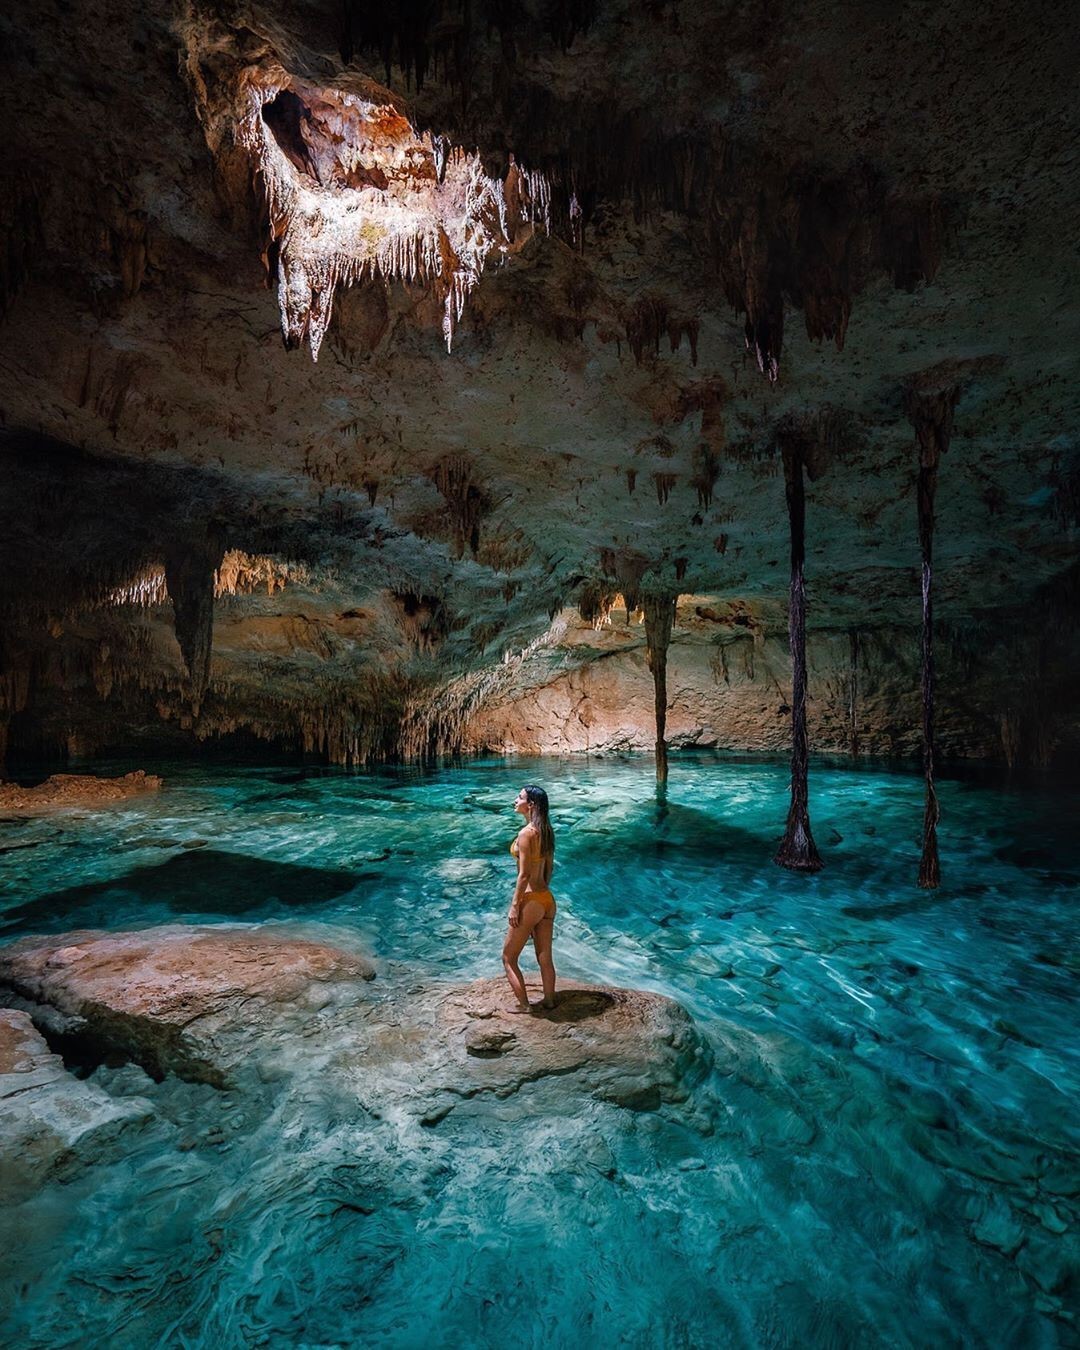 tulum and cenote tour from cozumel